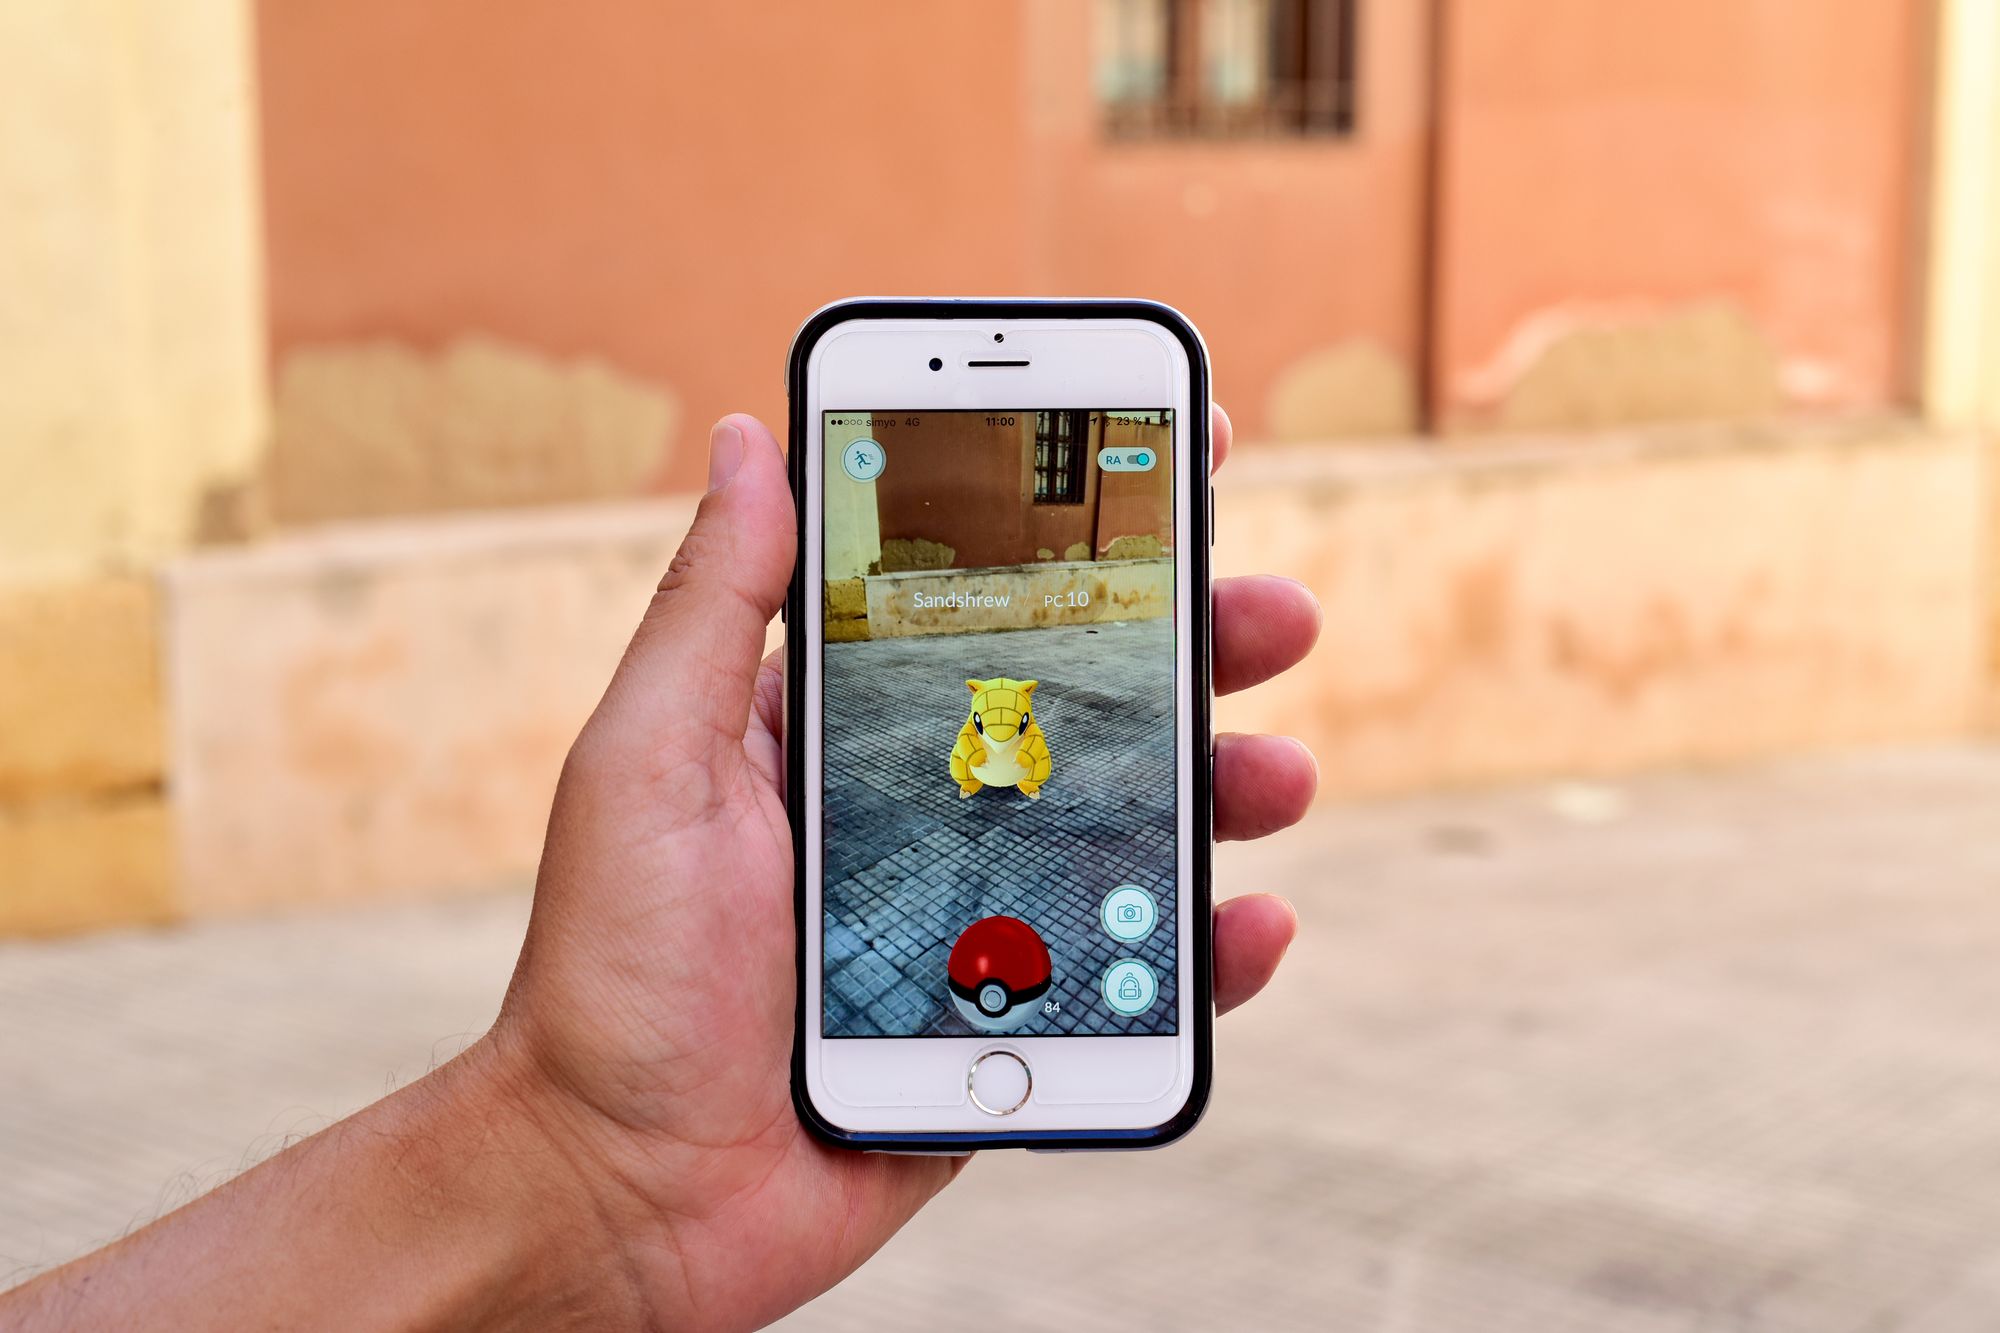 Pokémon Go! game on a smartphone; augmented reality superimposes virtual in-game elements over real world elements.